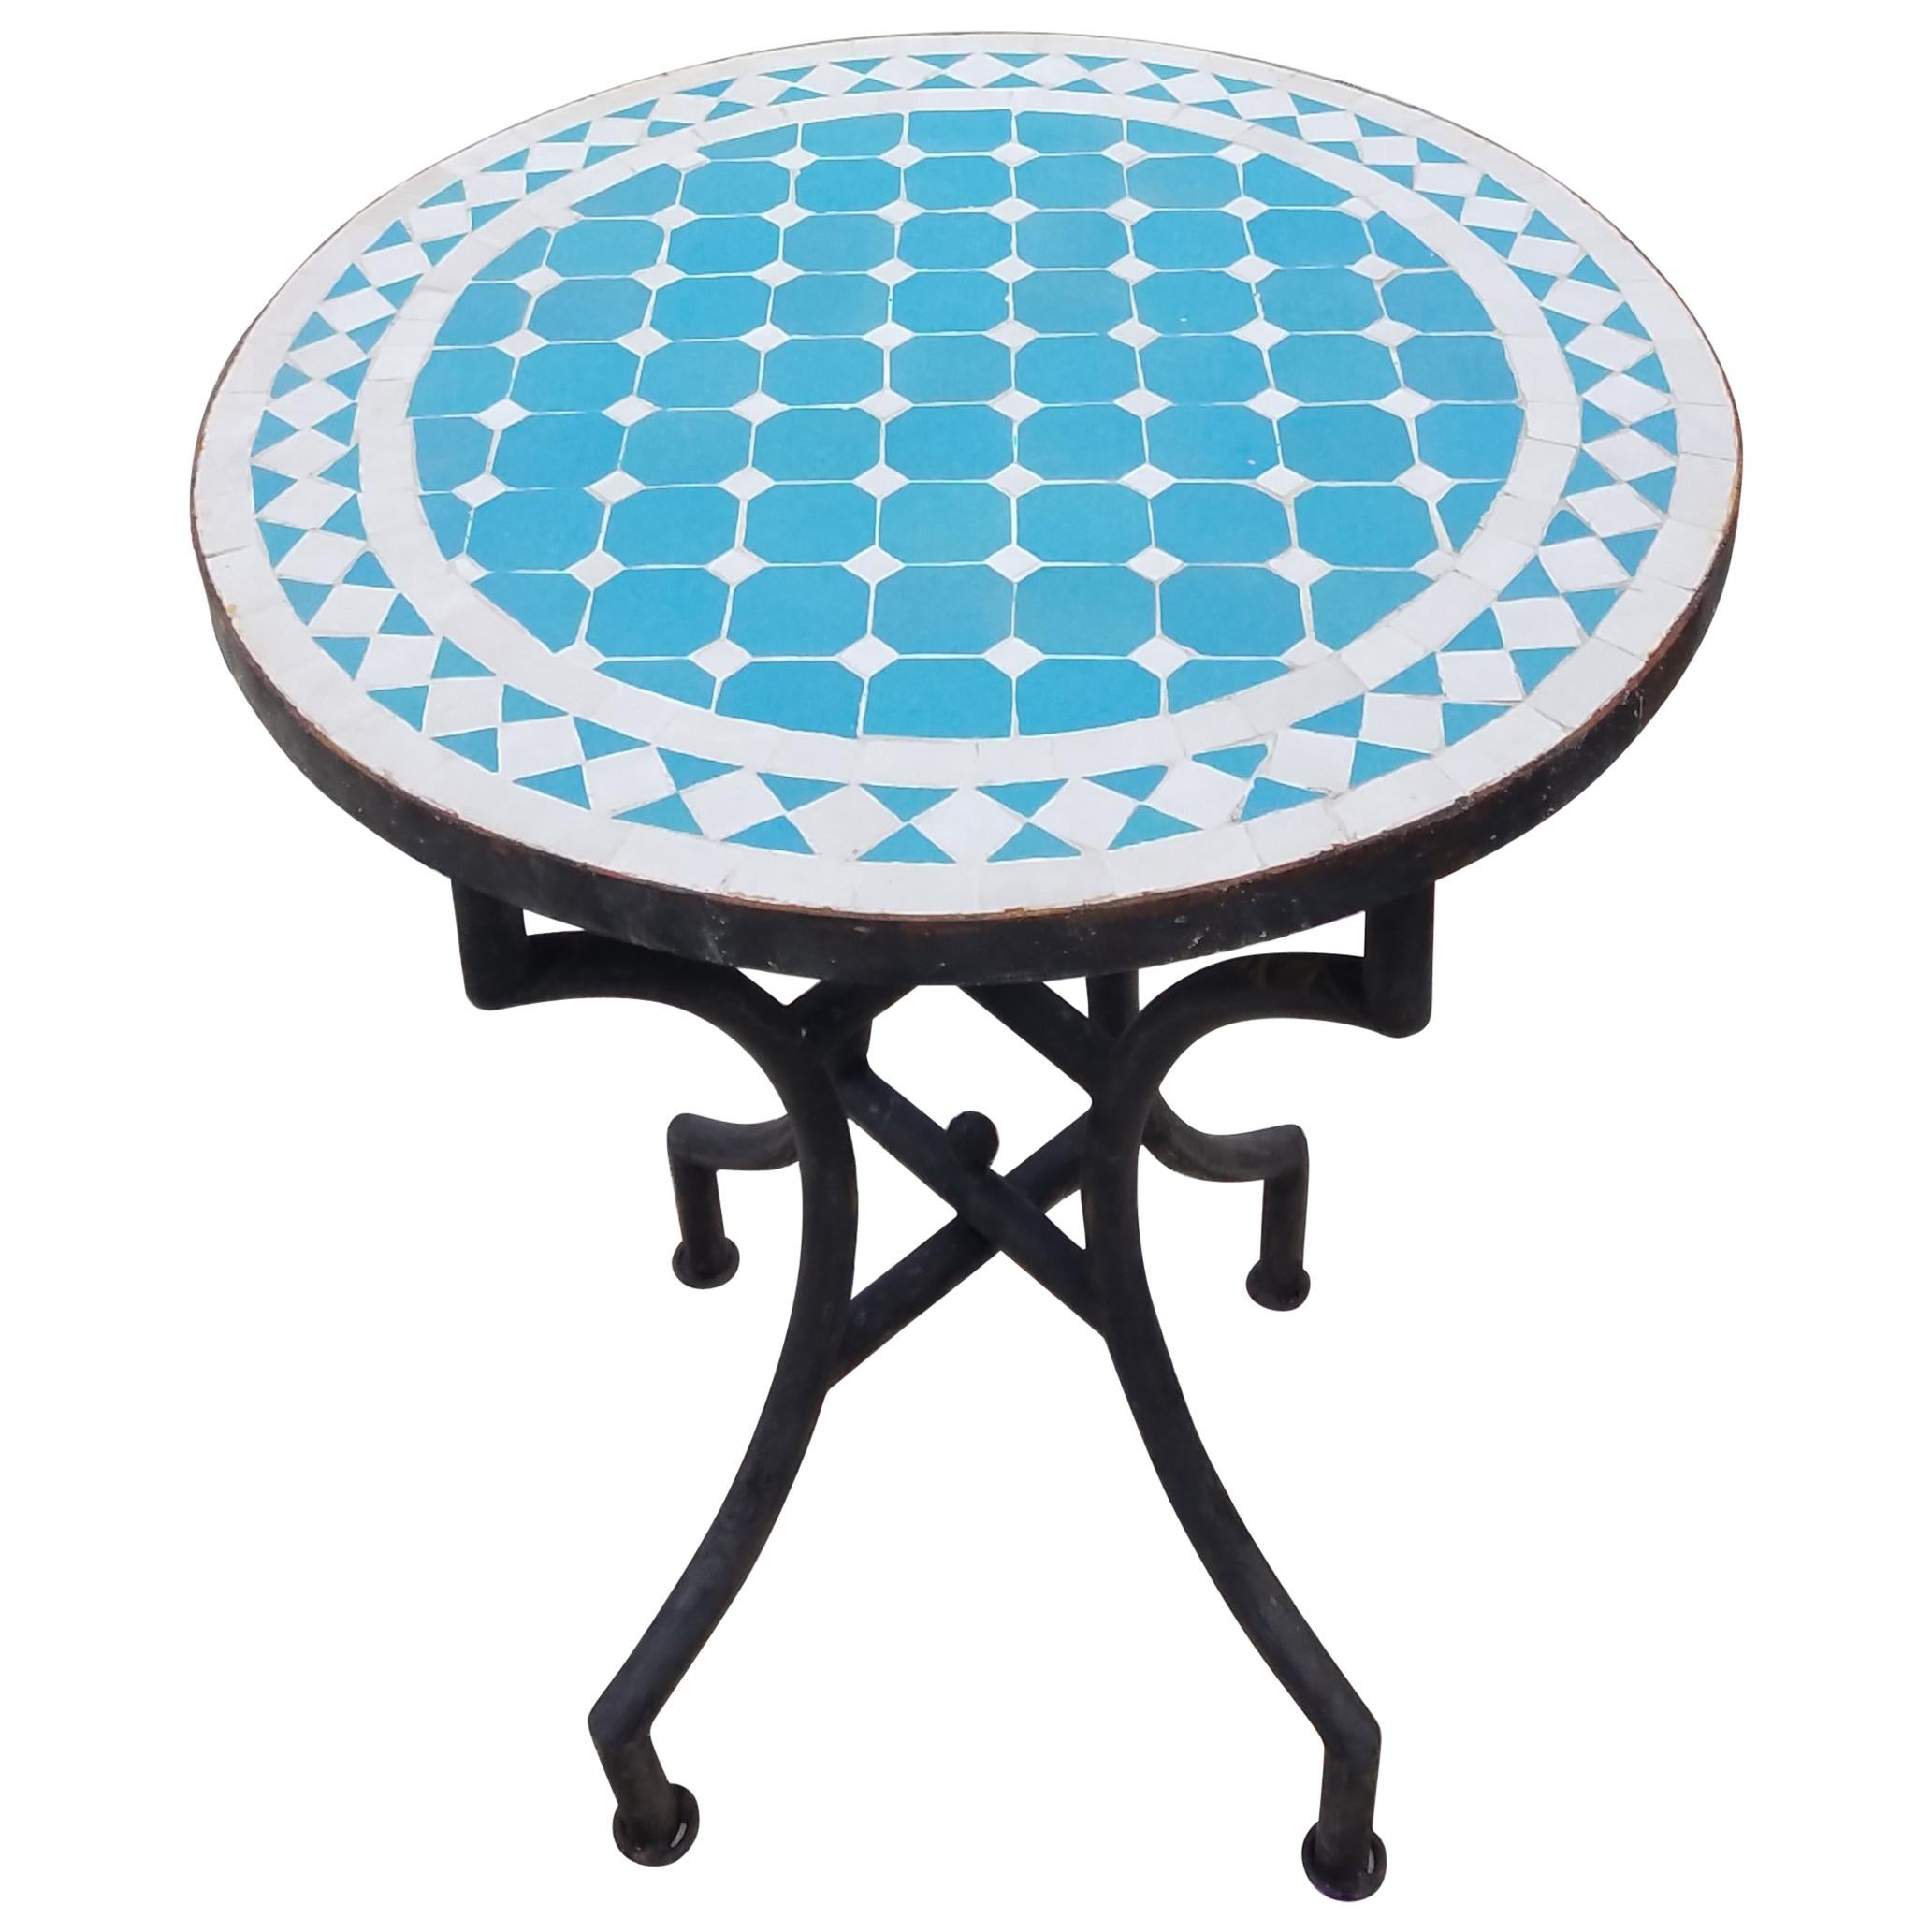 Turquoise / White Moroccan Mosaic Table - CR4